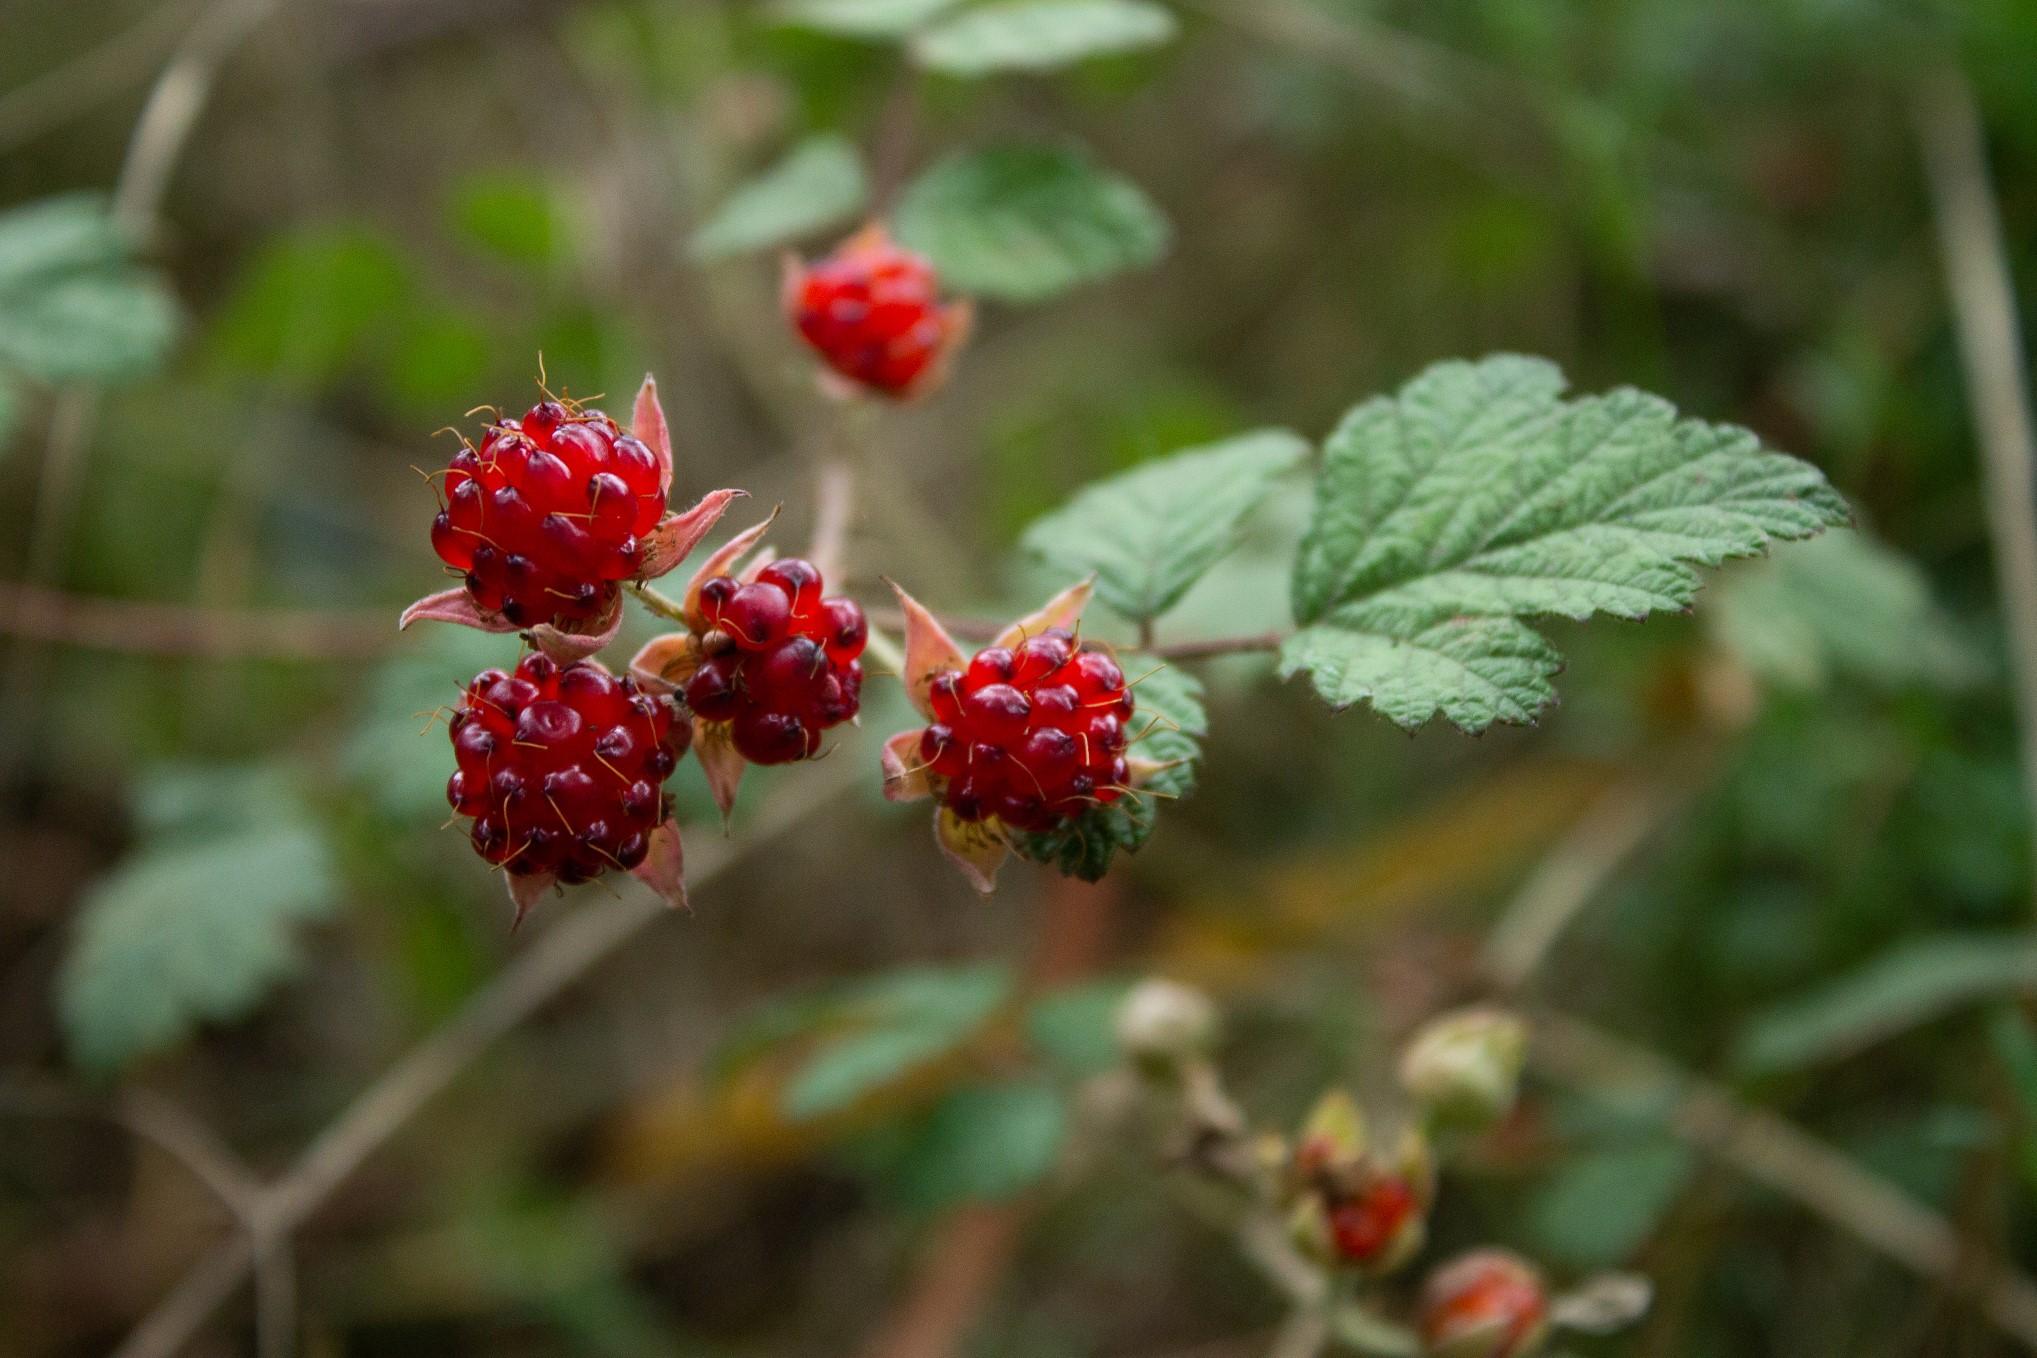 A cluster of bright red native raspberries with green leaves in the background